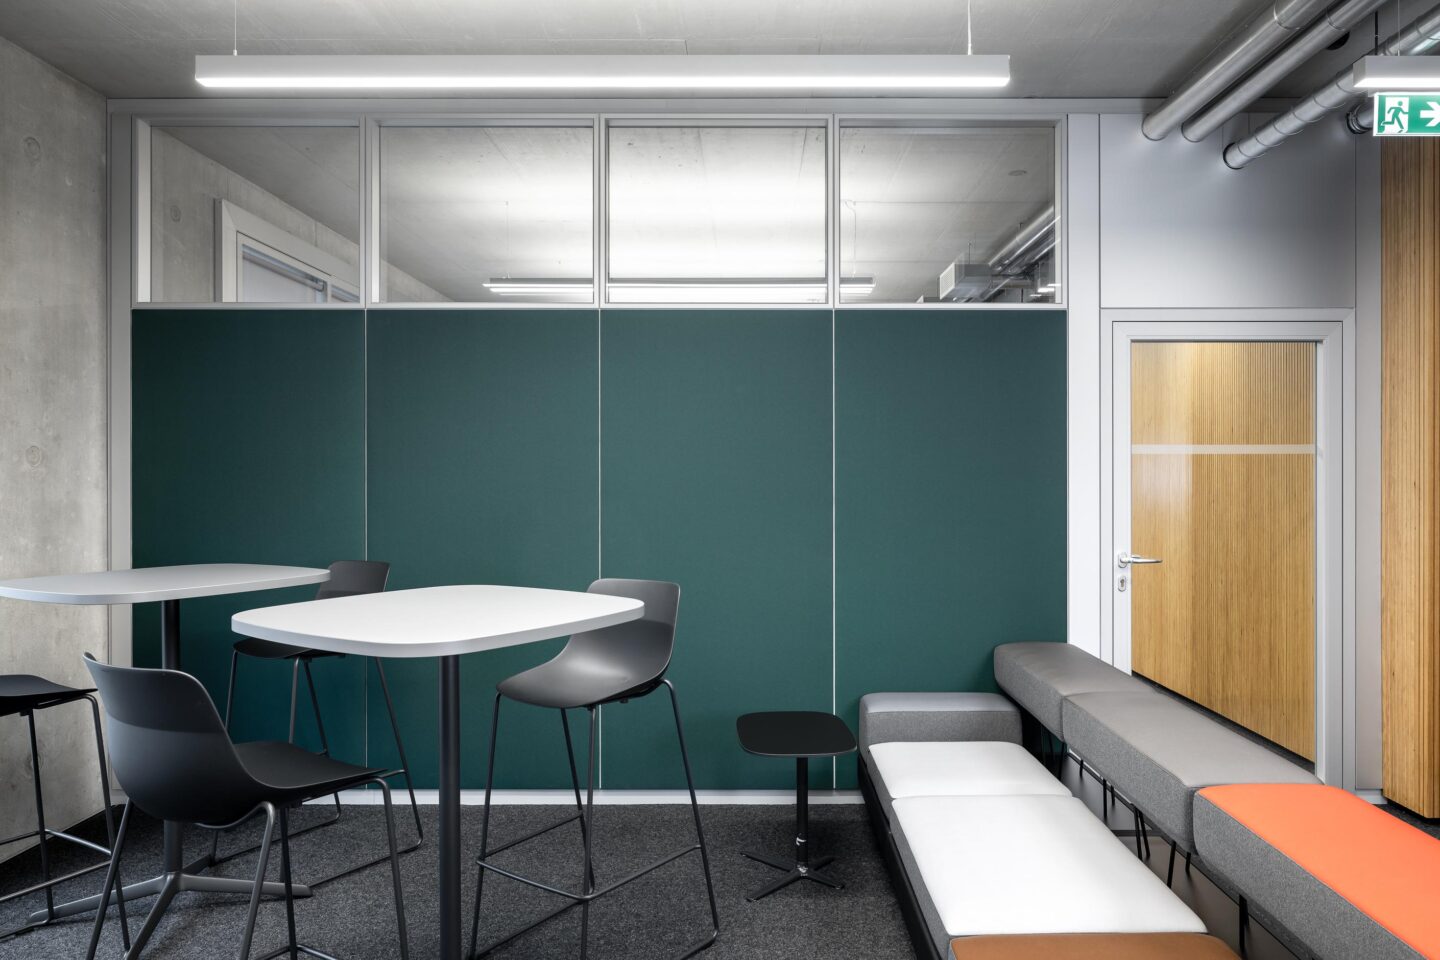 The Berlin office Kuehn Malvezzi Projects has used feco system elements to create an office working environment with a strong identity that facilitates concentrated work as well as communication and exchange within the team.